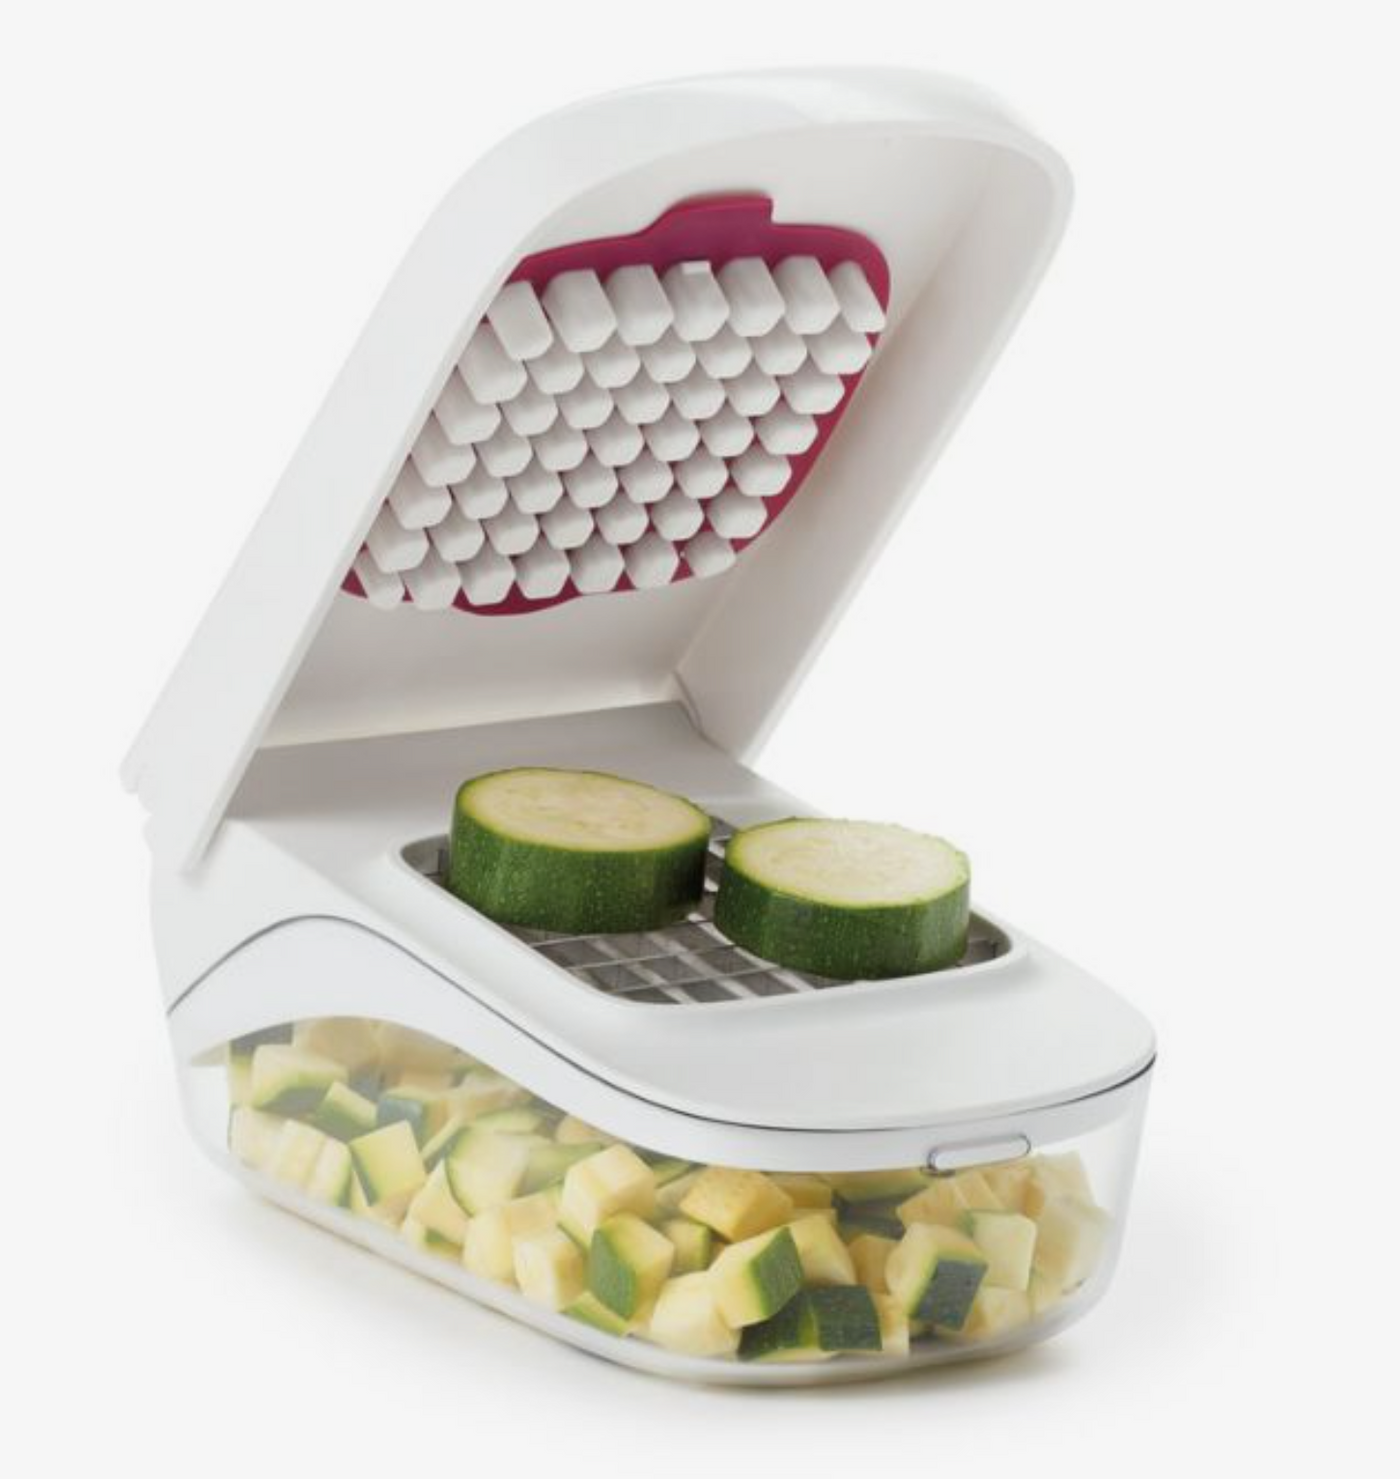 Chopping onion with the OXO Good Grips Vegetable Chopper 